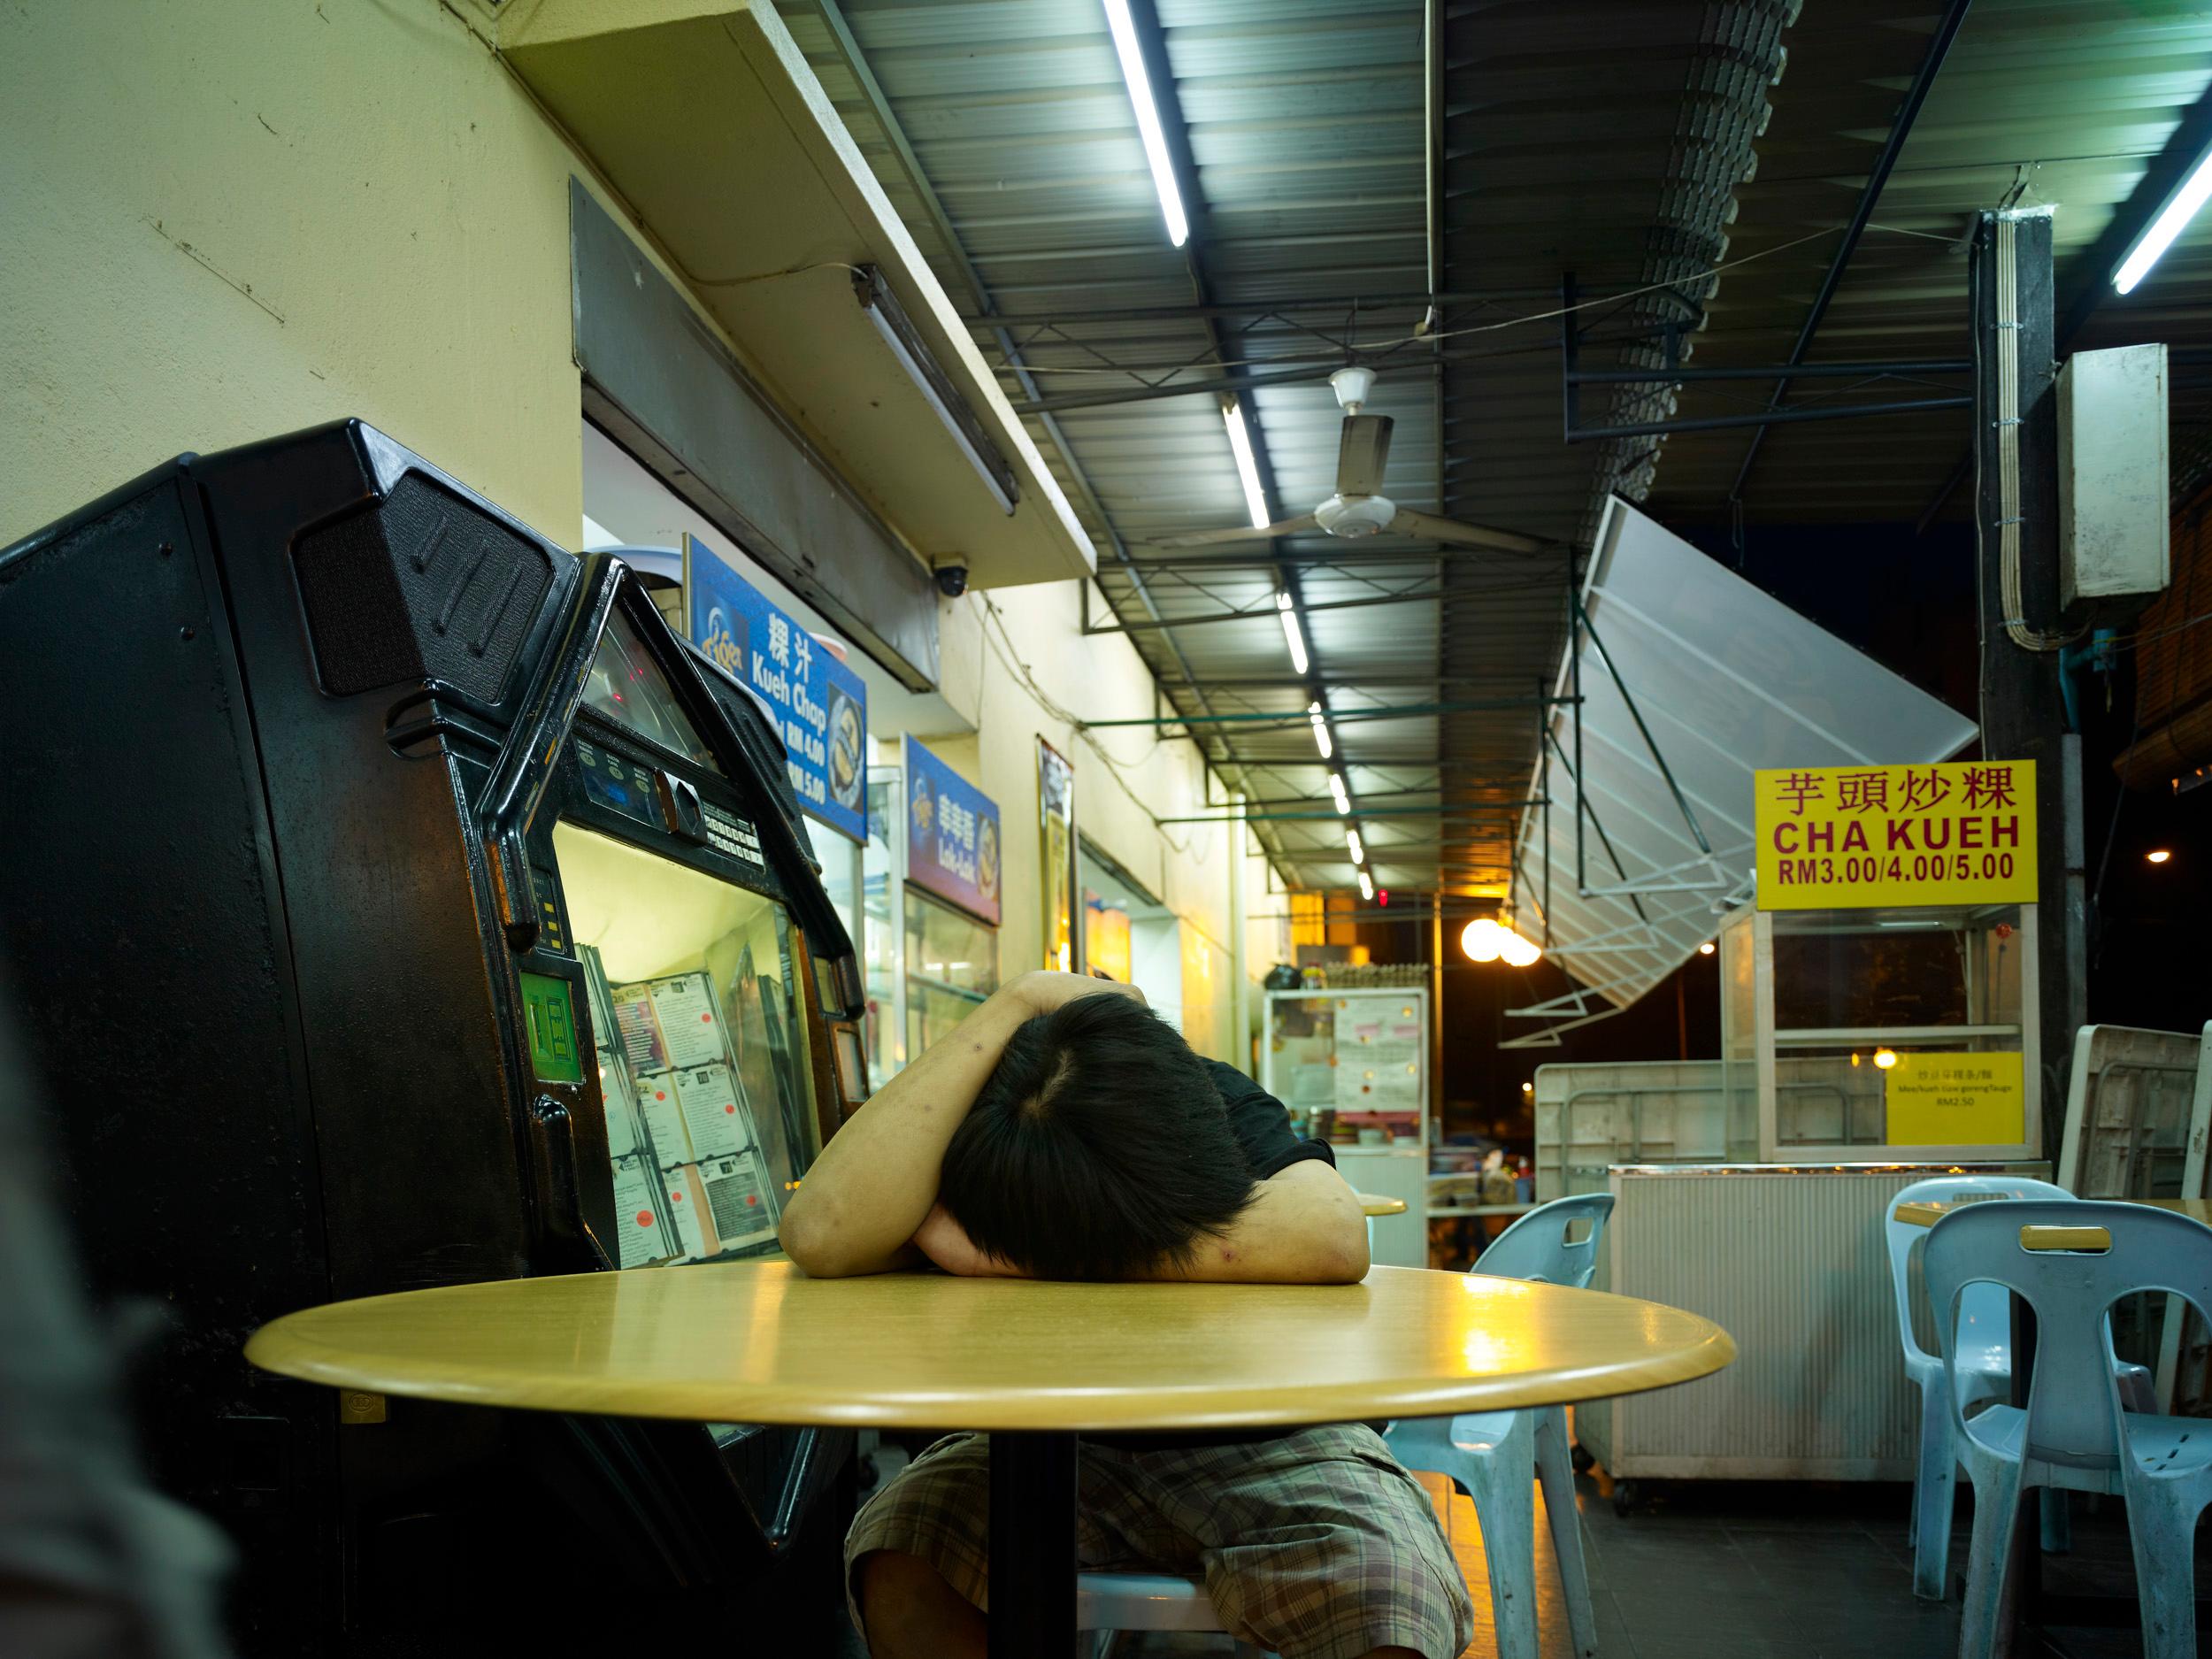 Borneo 4: photograph of sleeping man at yellow cafe table, Southeast Asia